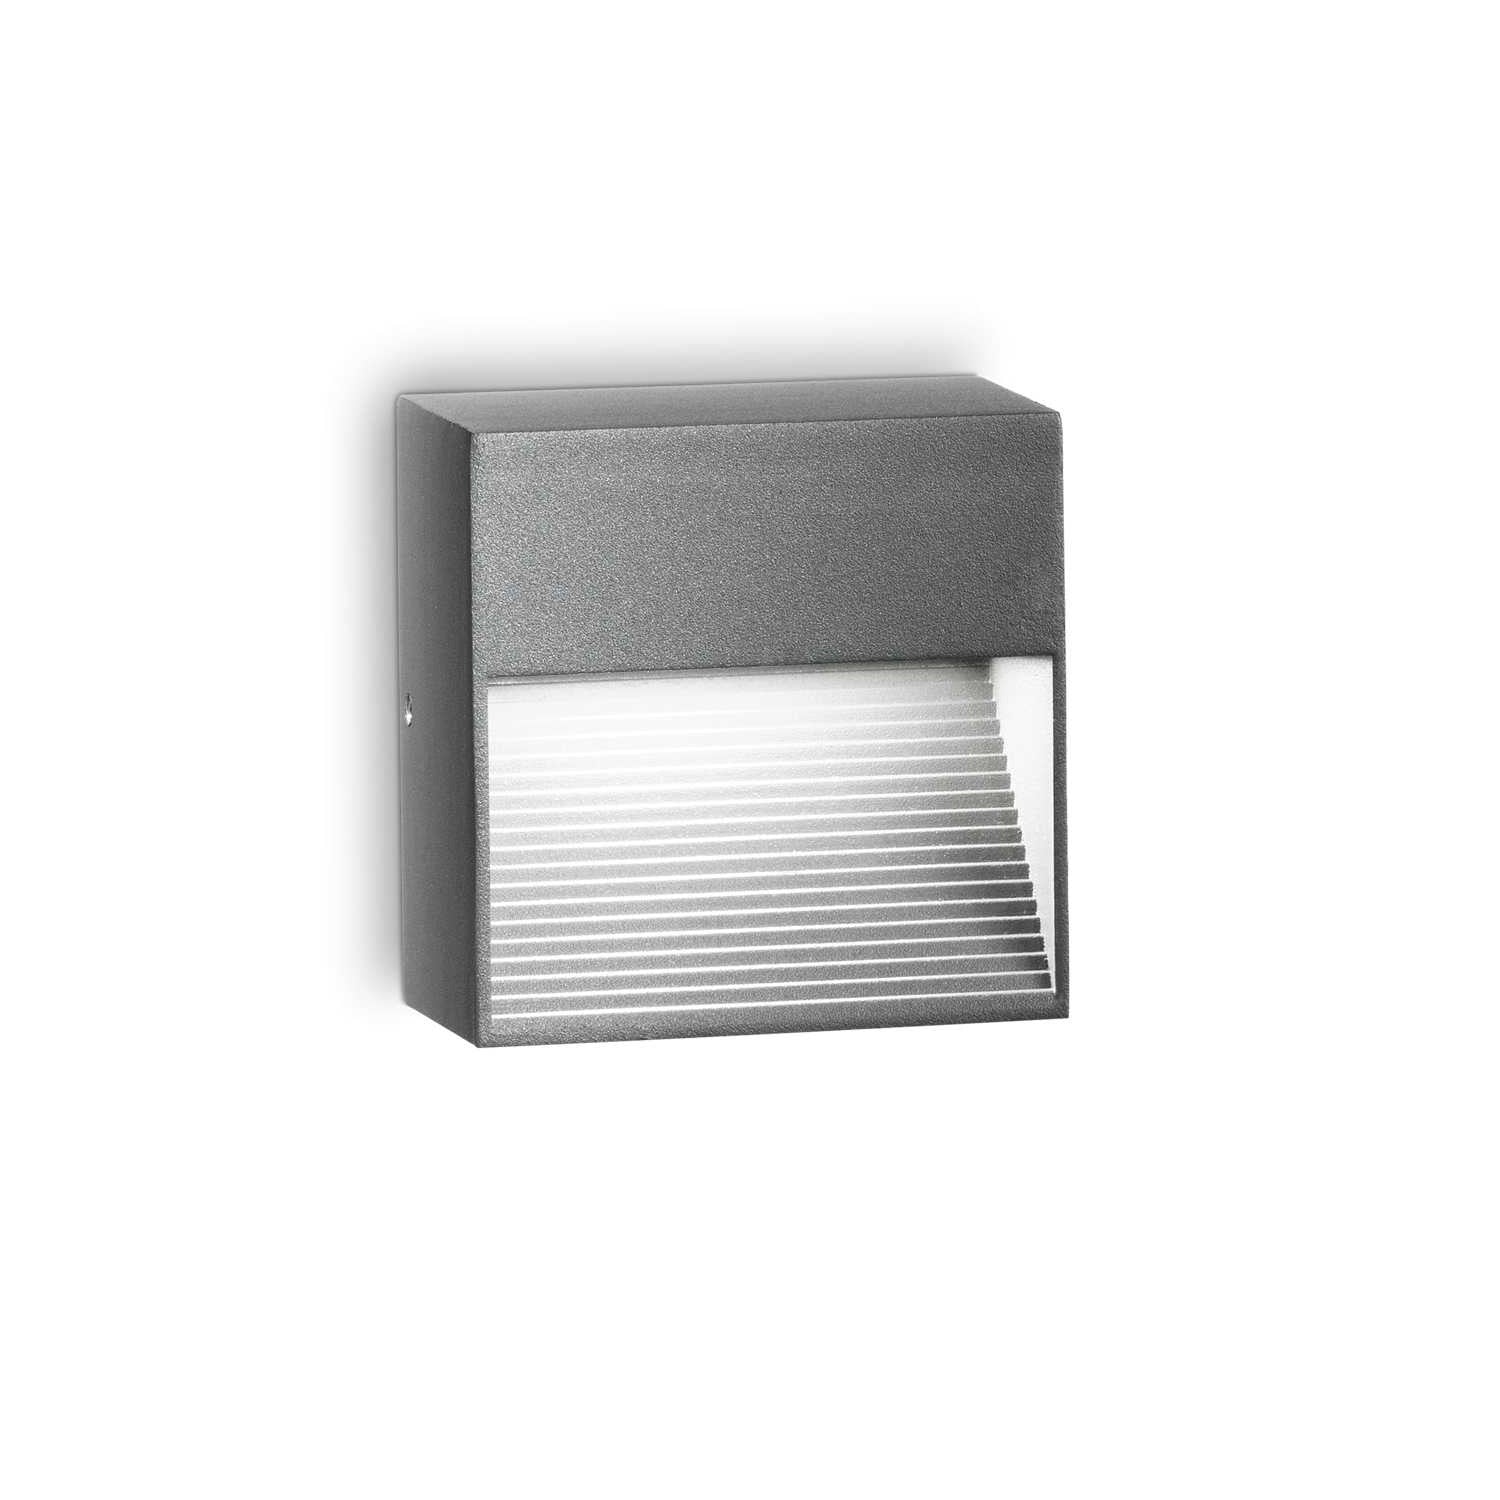 DOWN - Gray or white exterior staircase wall light